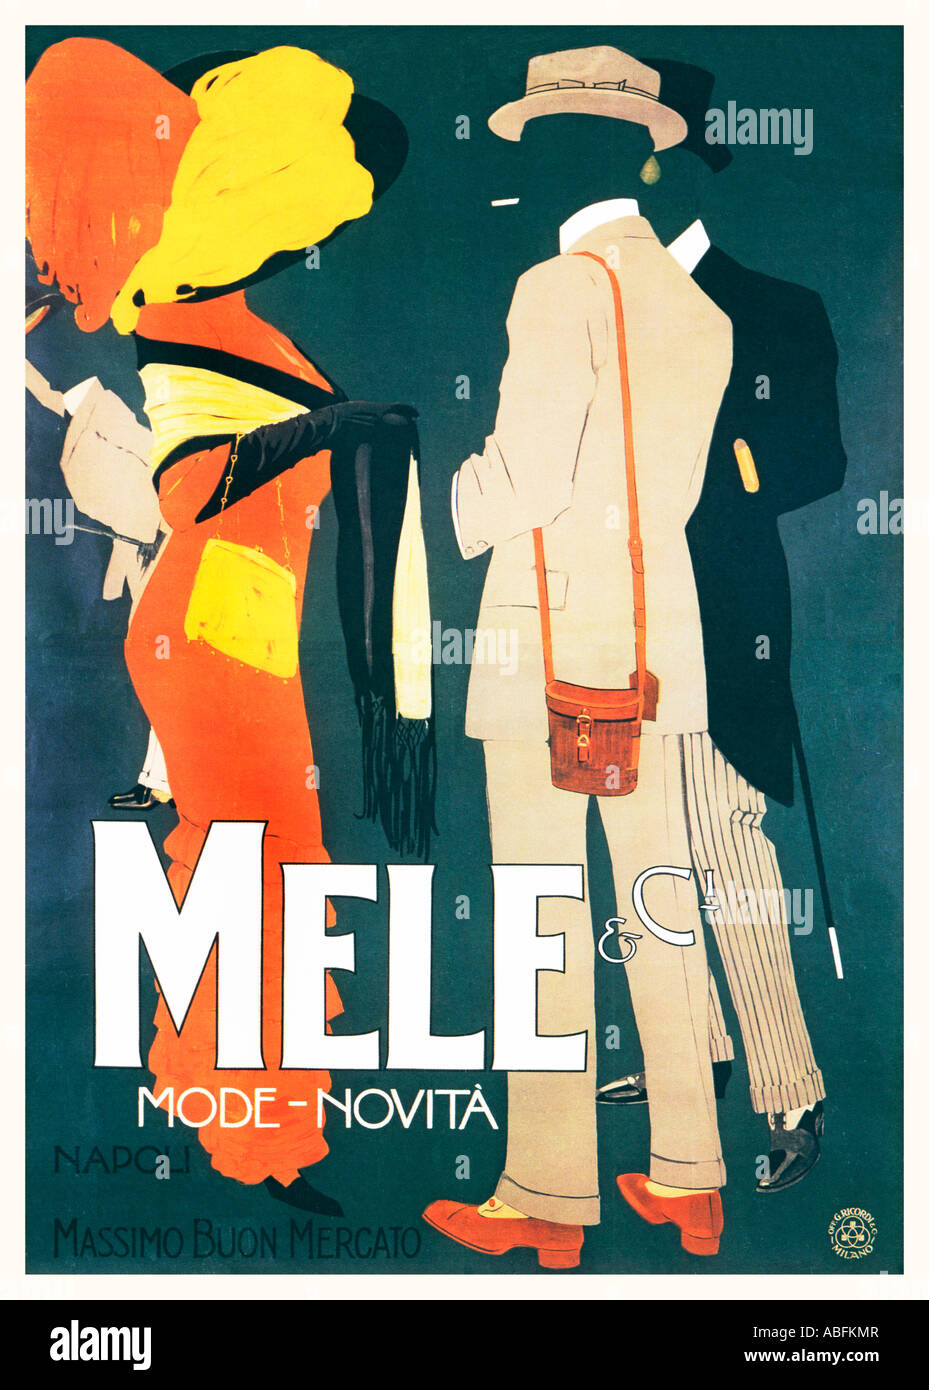 Mele Mode Novita superb 1913 Italian Art Nouveau poster by Dudovitch for the Fashion House in Naples Stock Photo